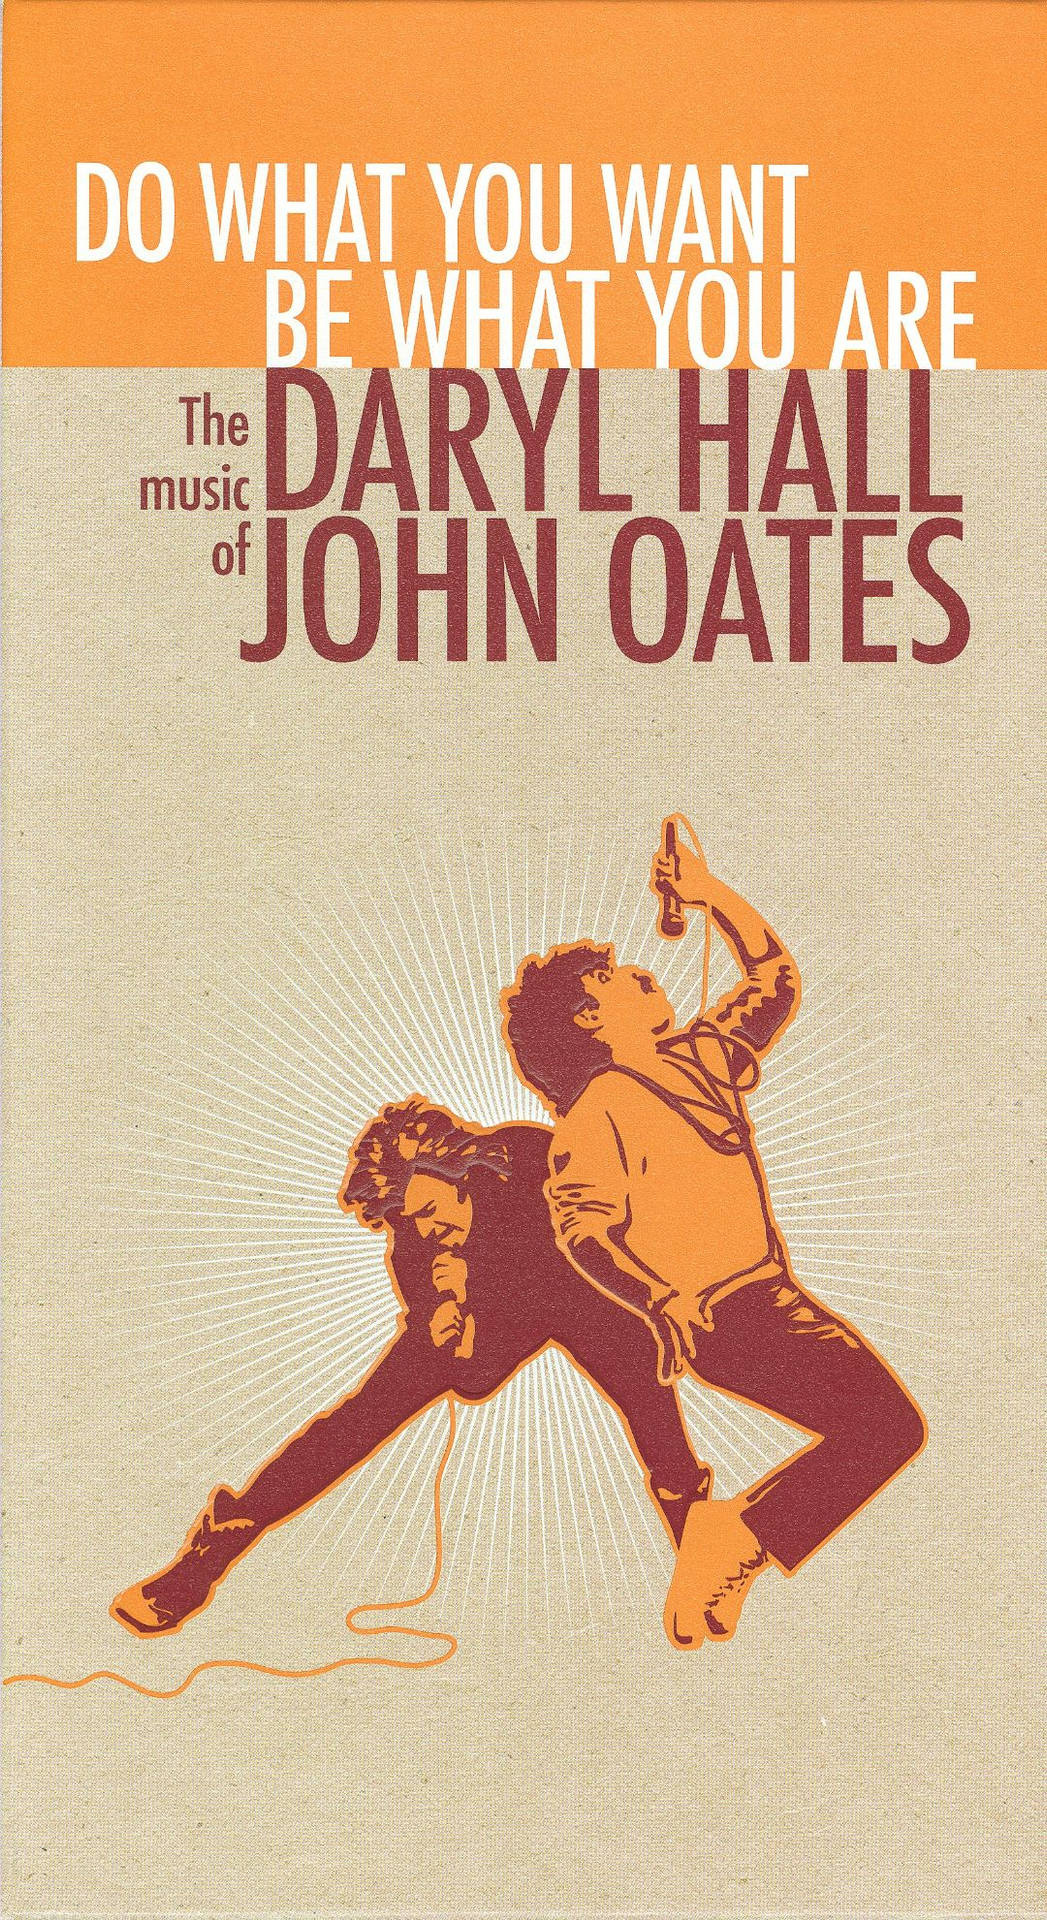 The Music Of Daryl Hall And John Oates Album Cover Wallpaper